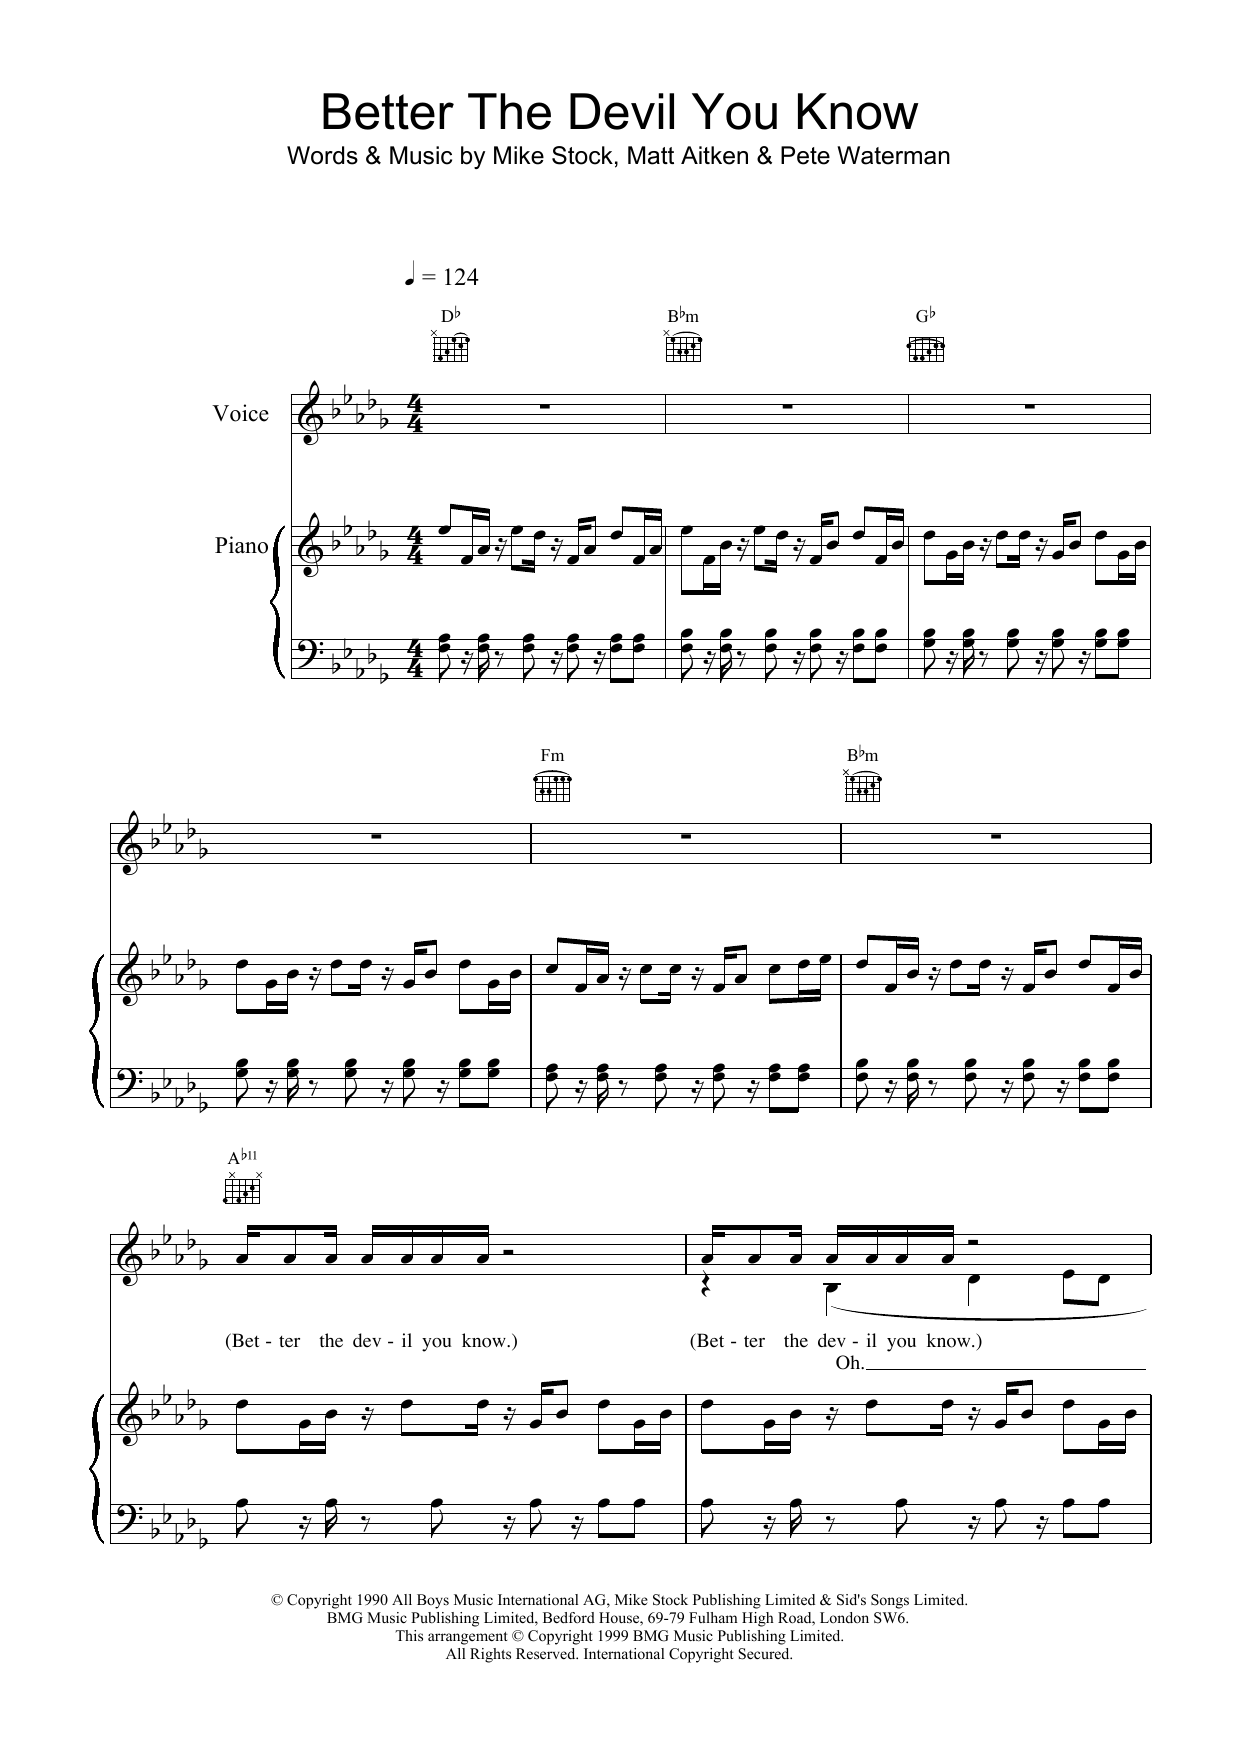 Download Steps Better The Devil You Know Sheet Music